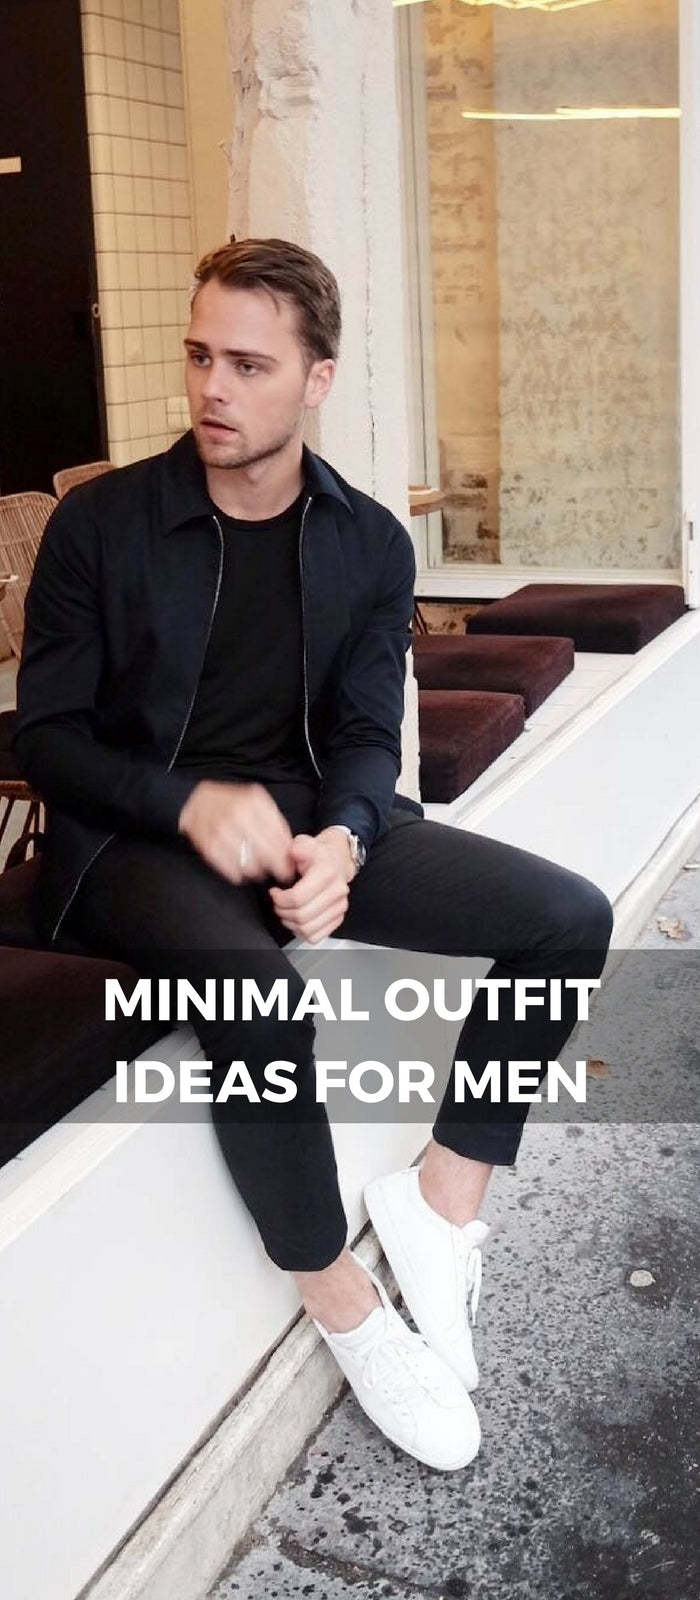 Minimal Outfit Ideas For Men 